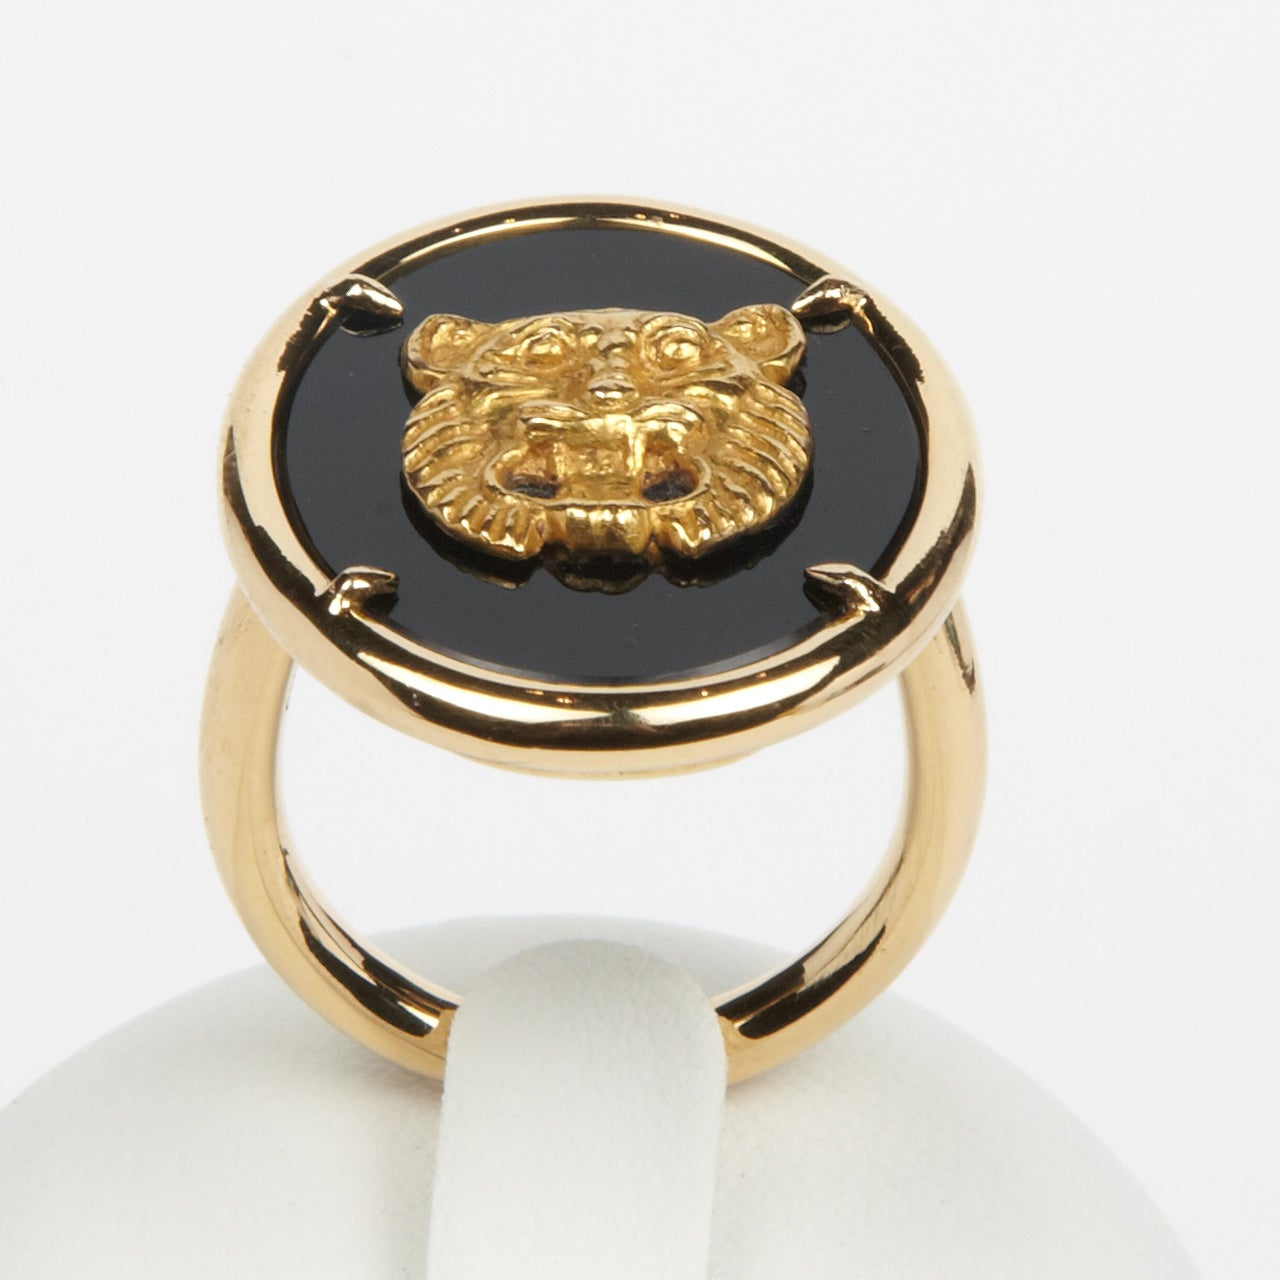 GOLD & ONYX RING WITH ANTIQUE LION HEAD 2